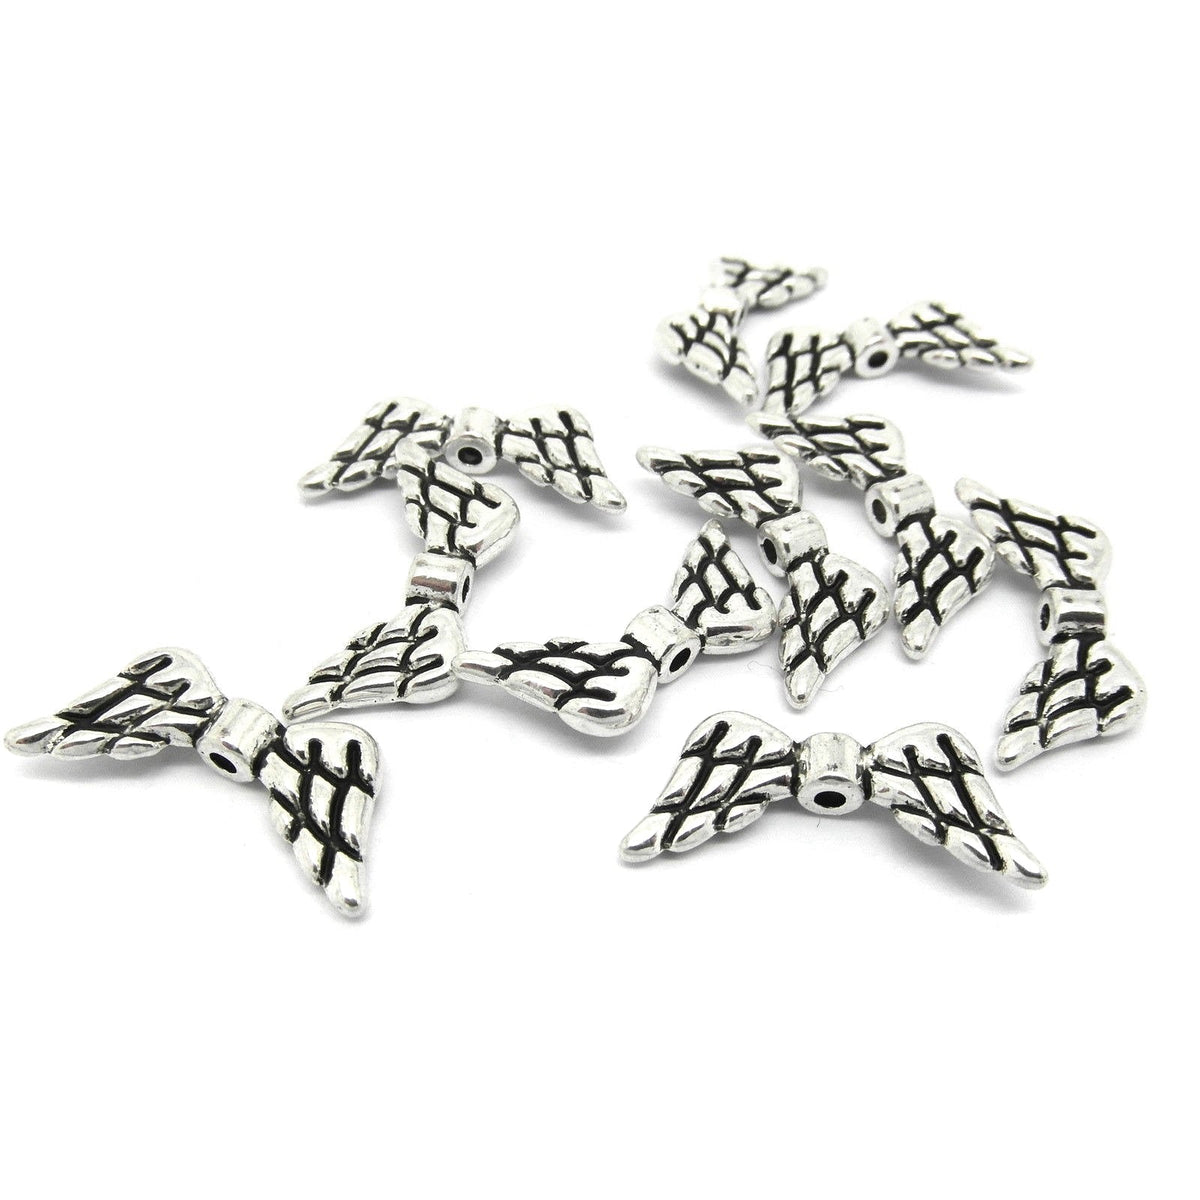 AVBeads Mixed Charms Fairy Charms Silver Metal 2169 100pcs